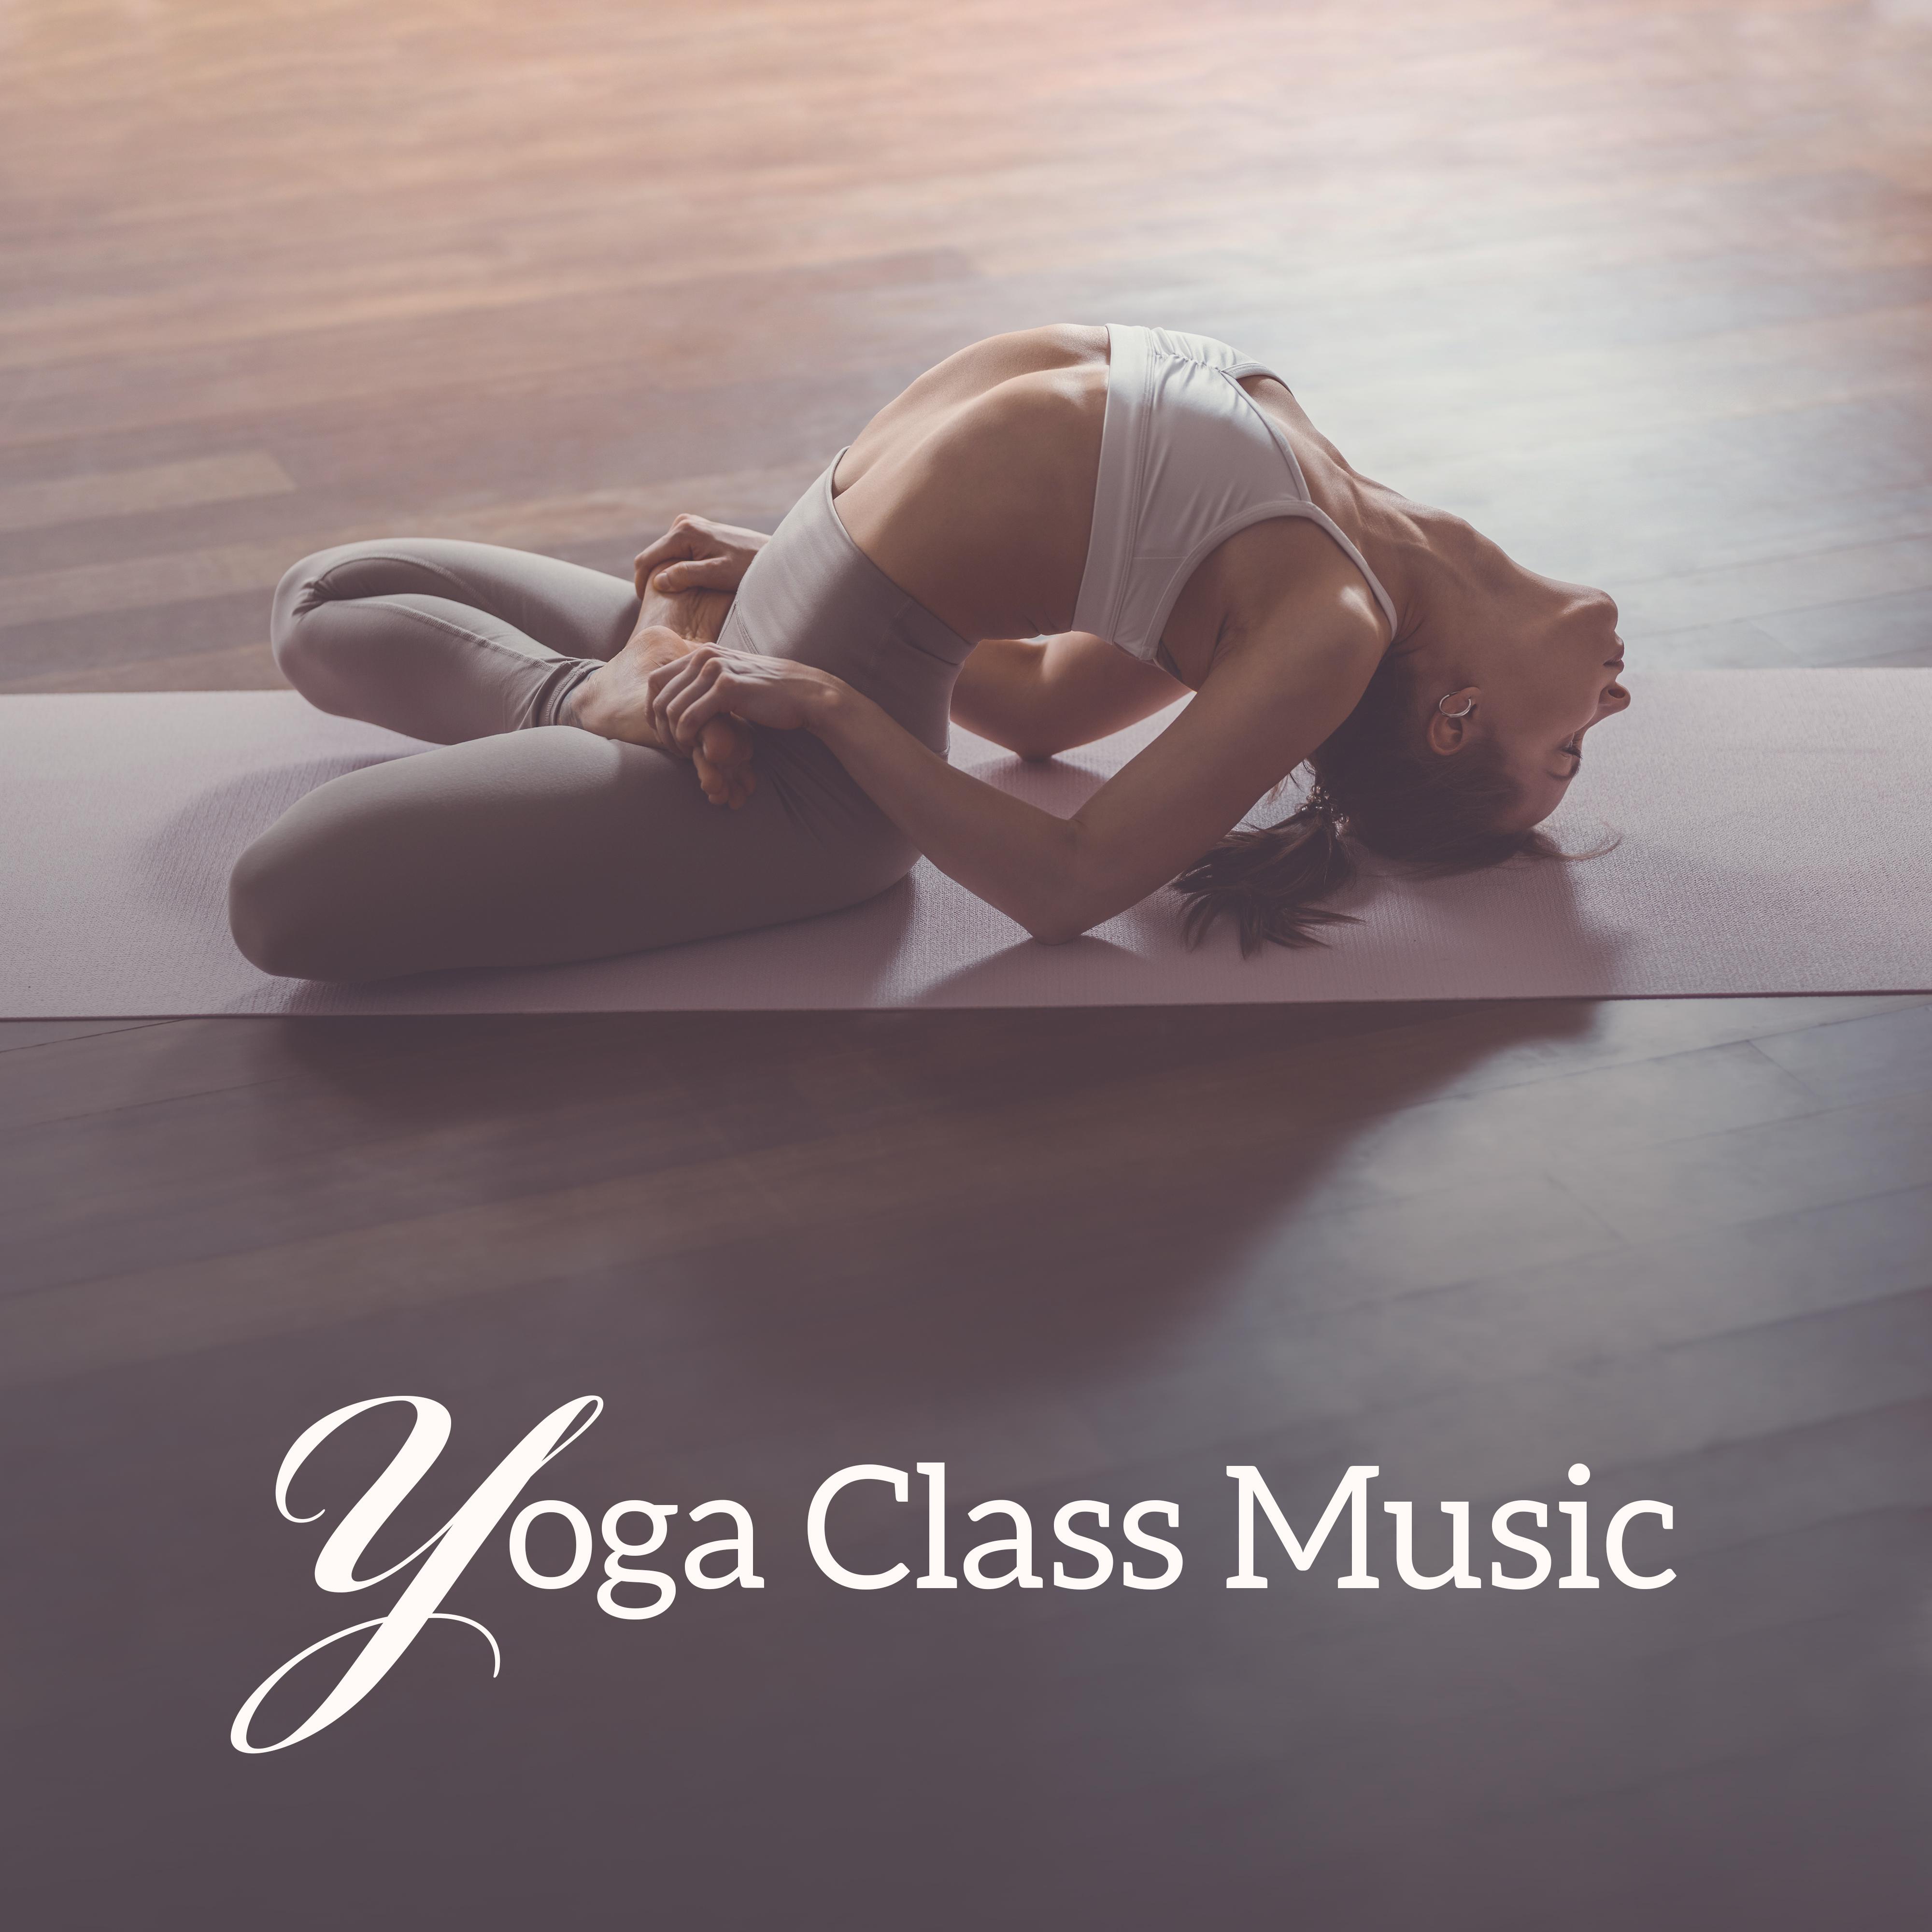 Yoga Class Music: 2019 Fresh New Age Music for Meditation & Deep Body & Soul Relaxation